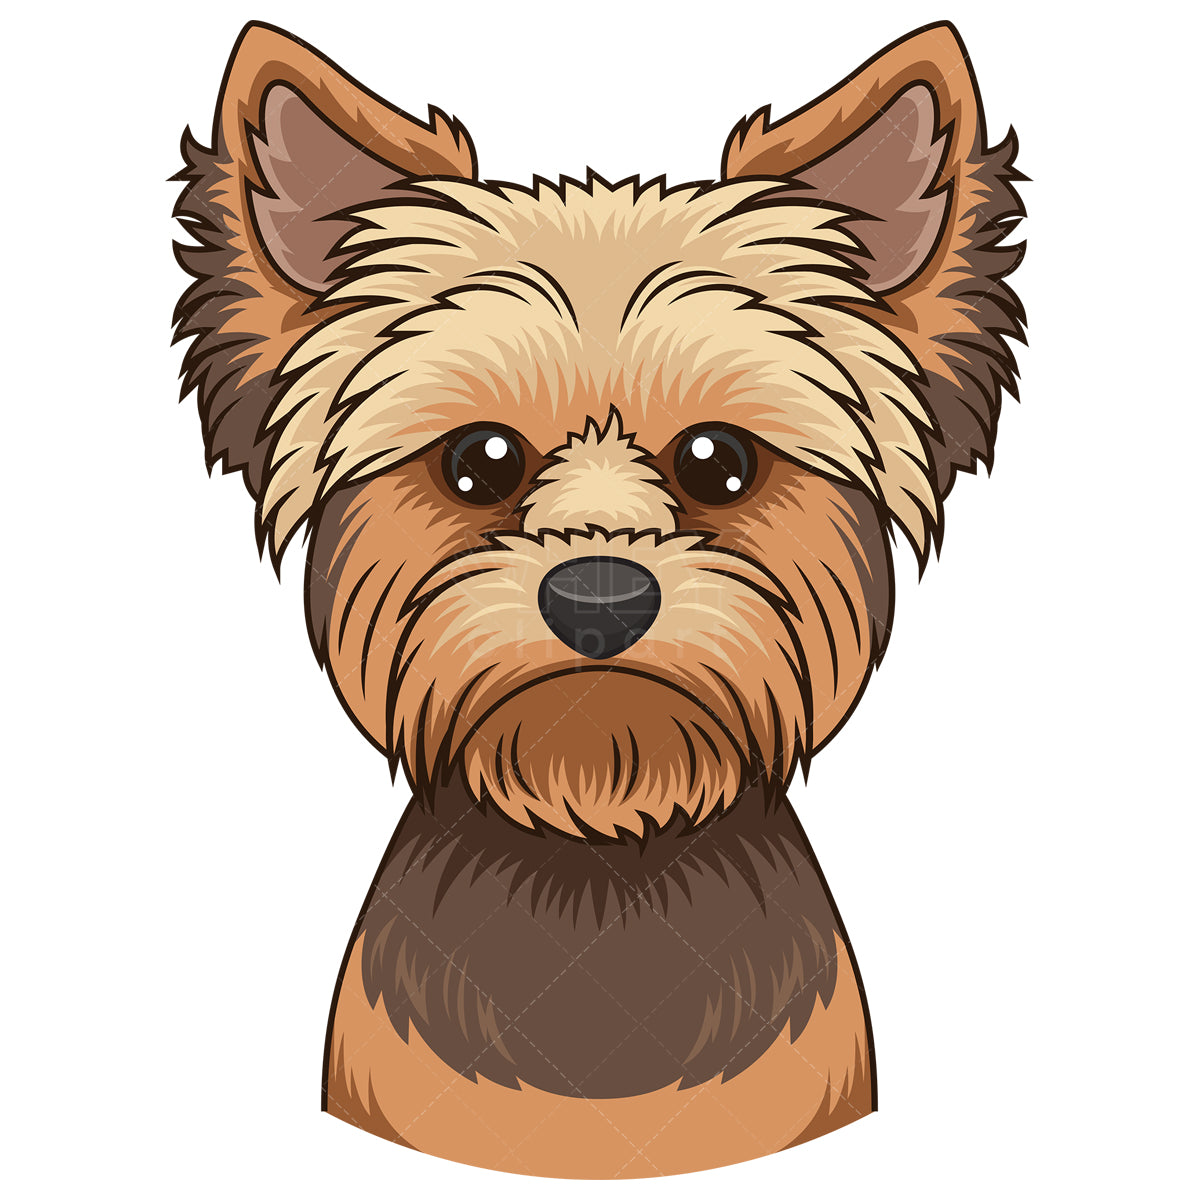 Royalty-free stock vector illustration of a yorkie face.